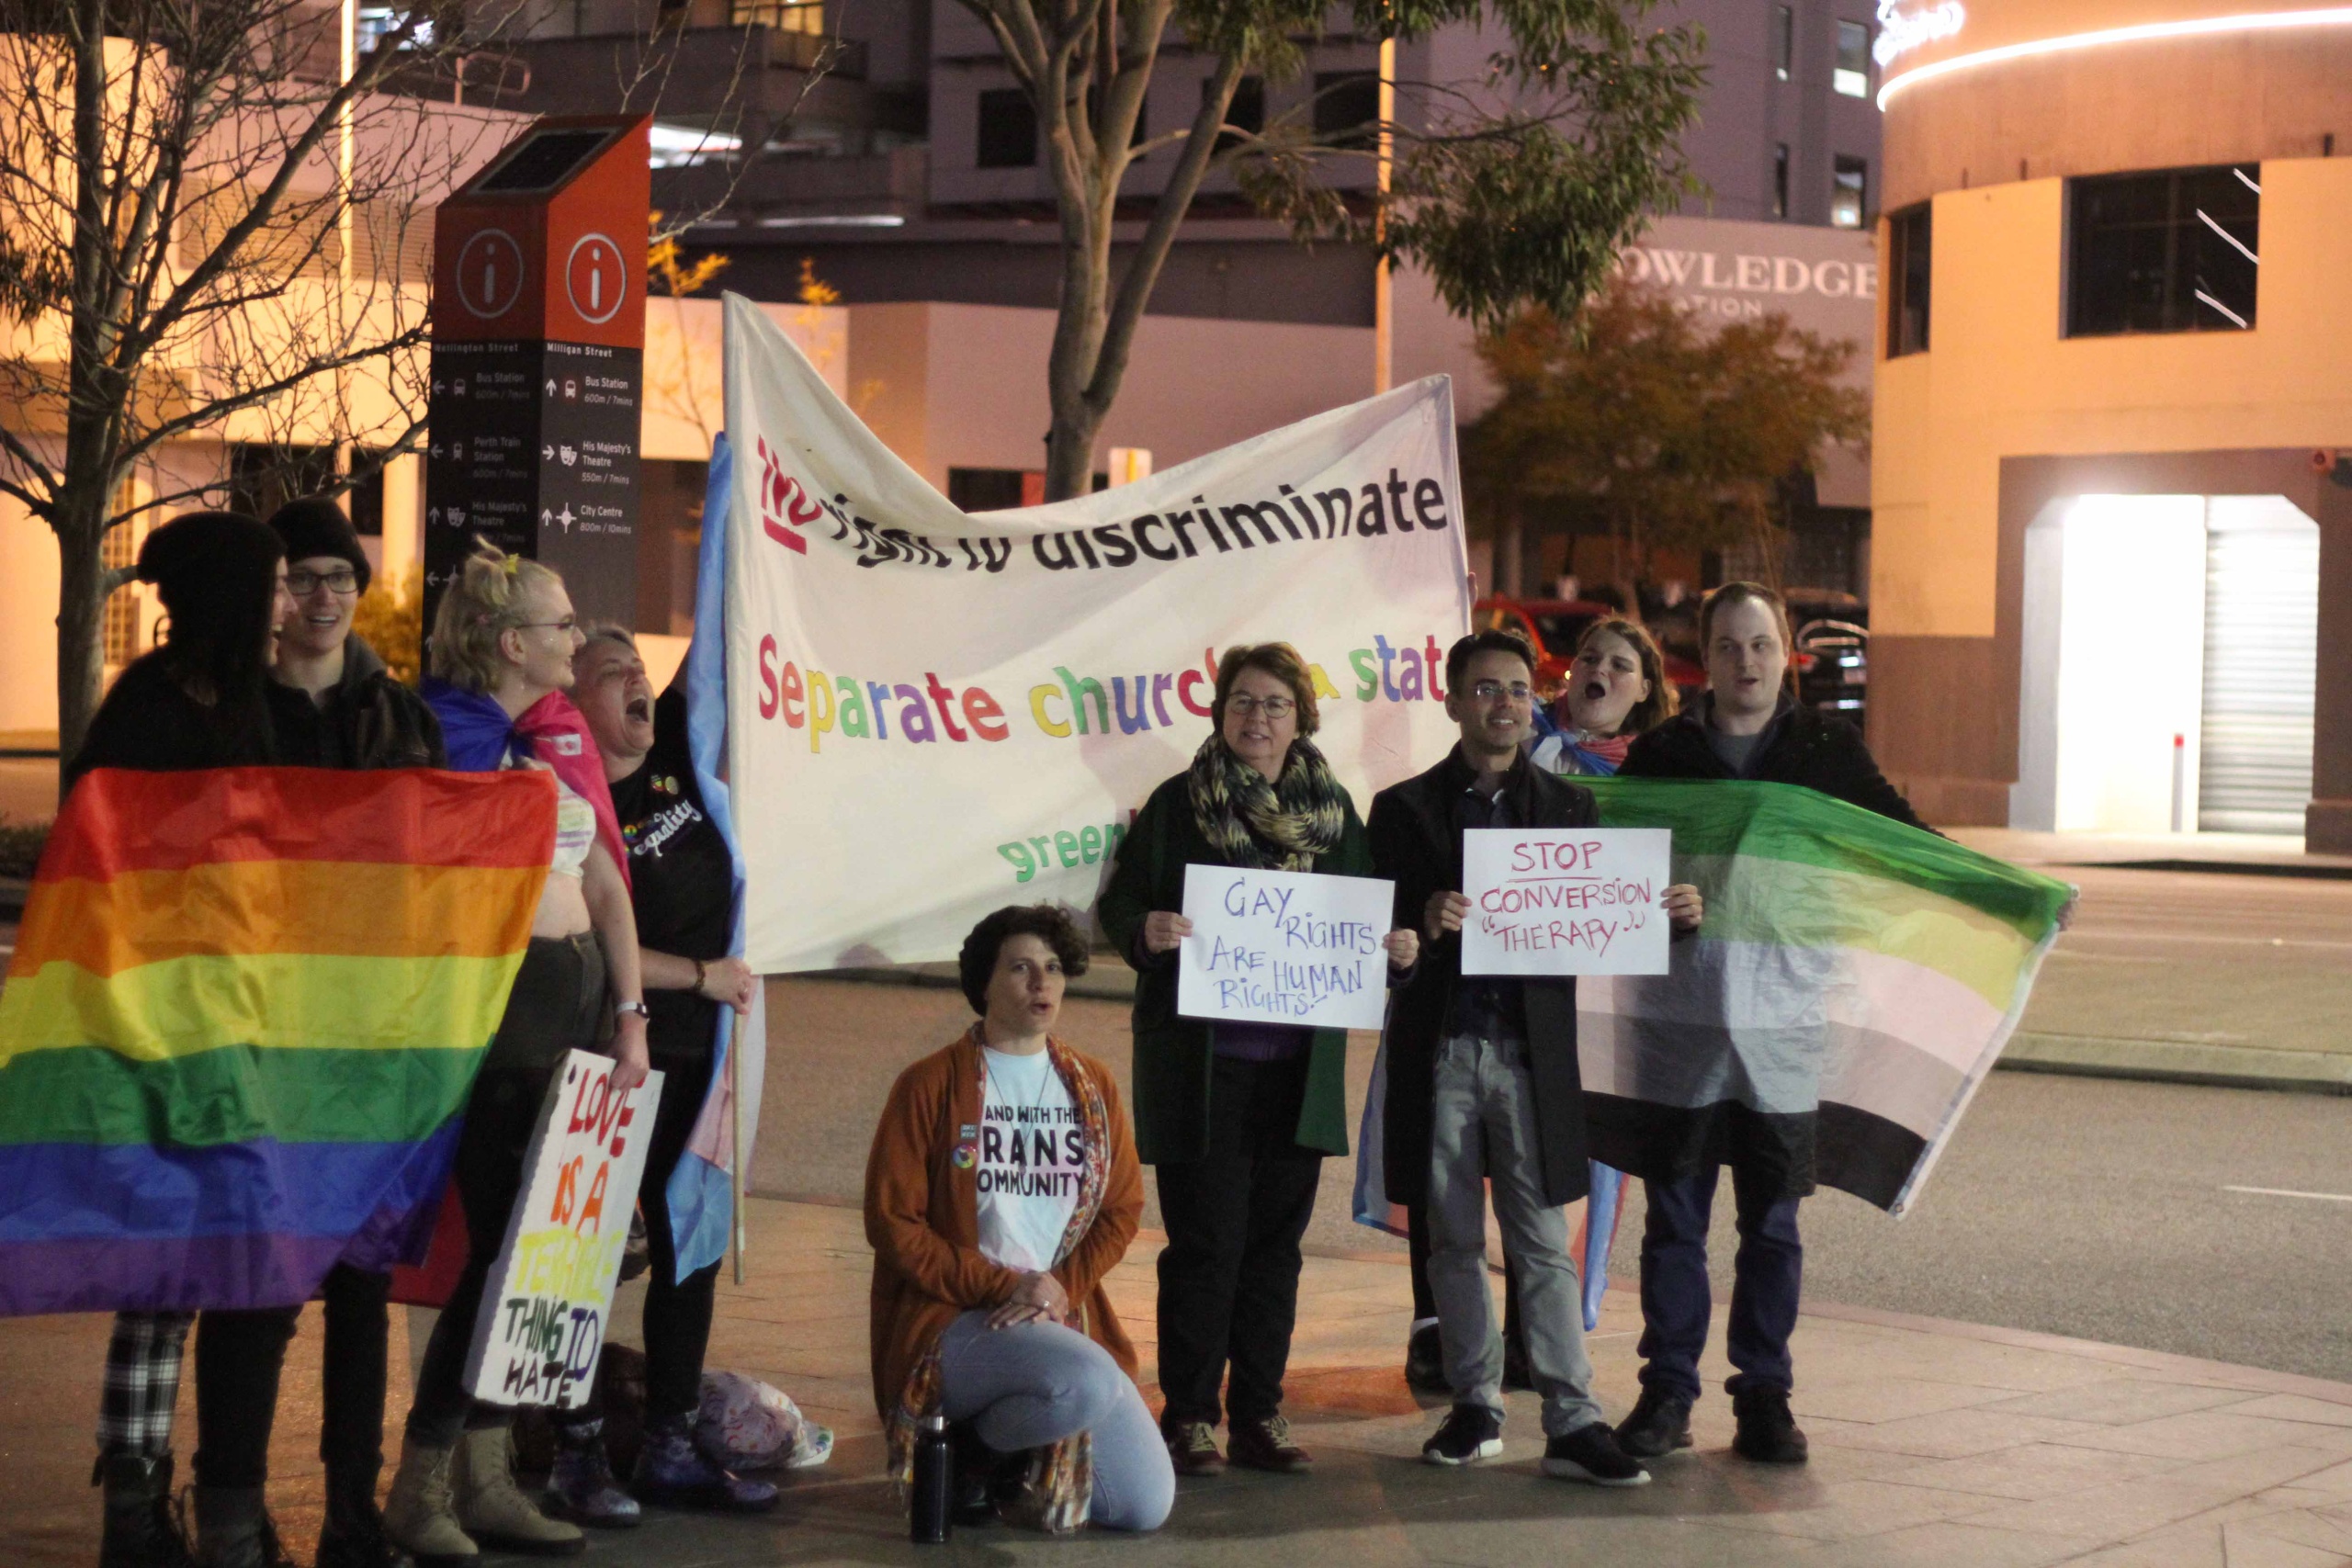 LGBTIQA+ rights activists protest queer conversion practices/therapy in Perth, Australia.